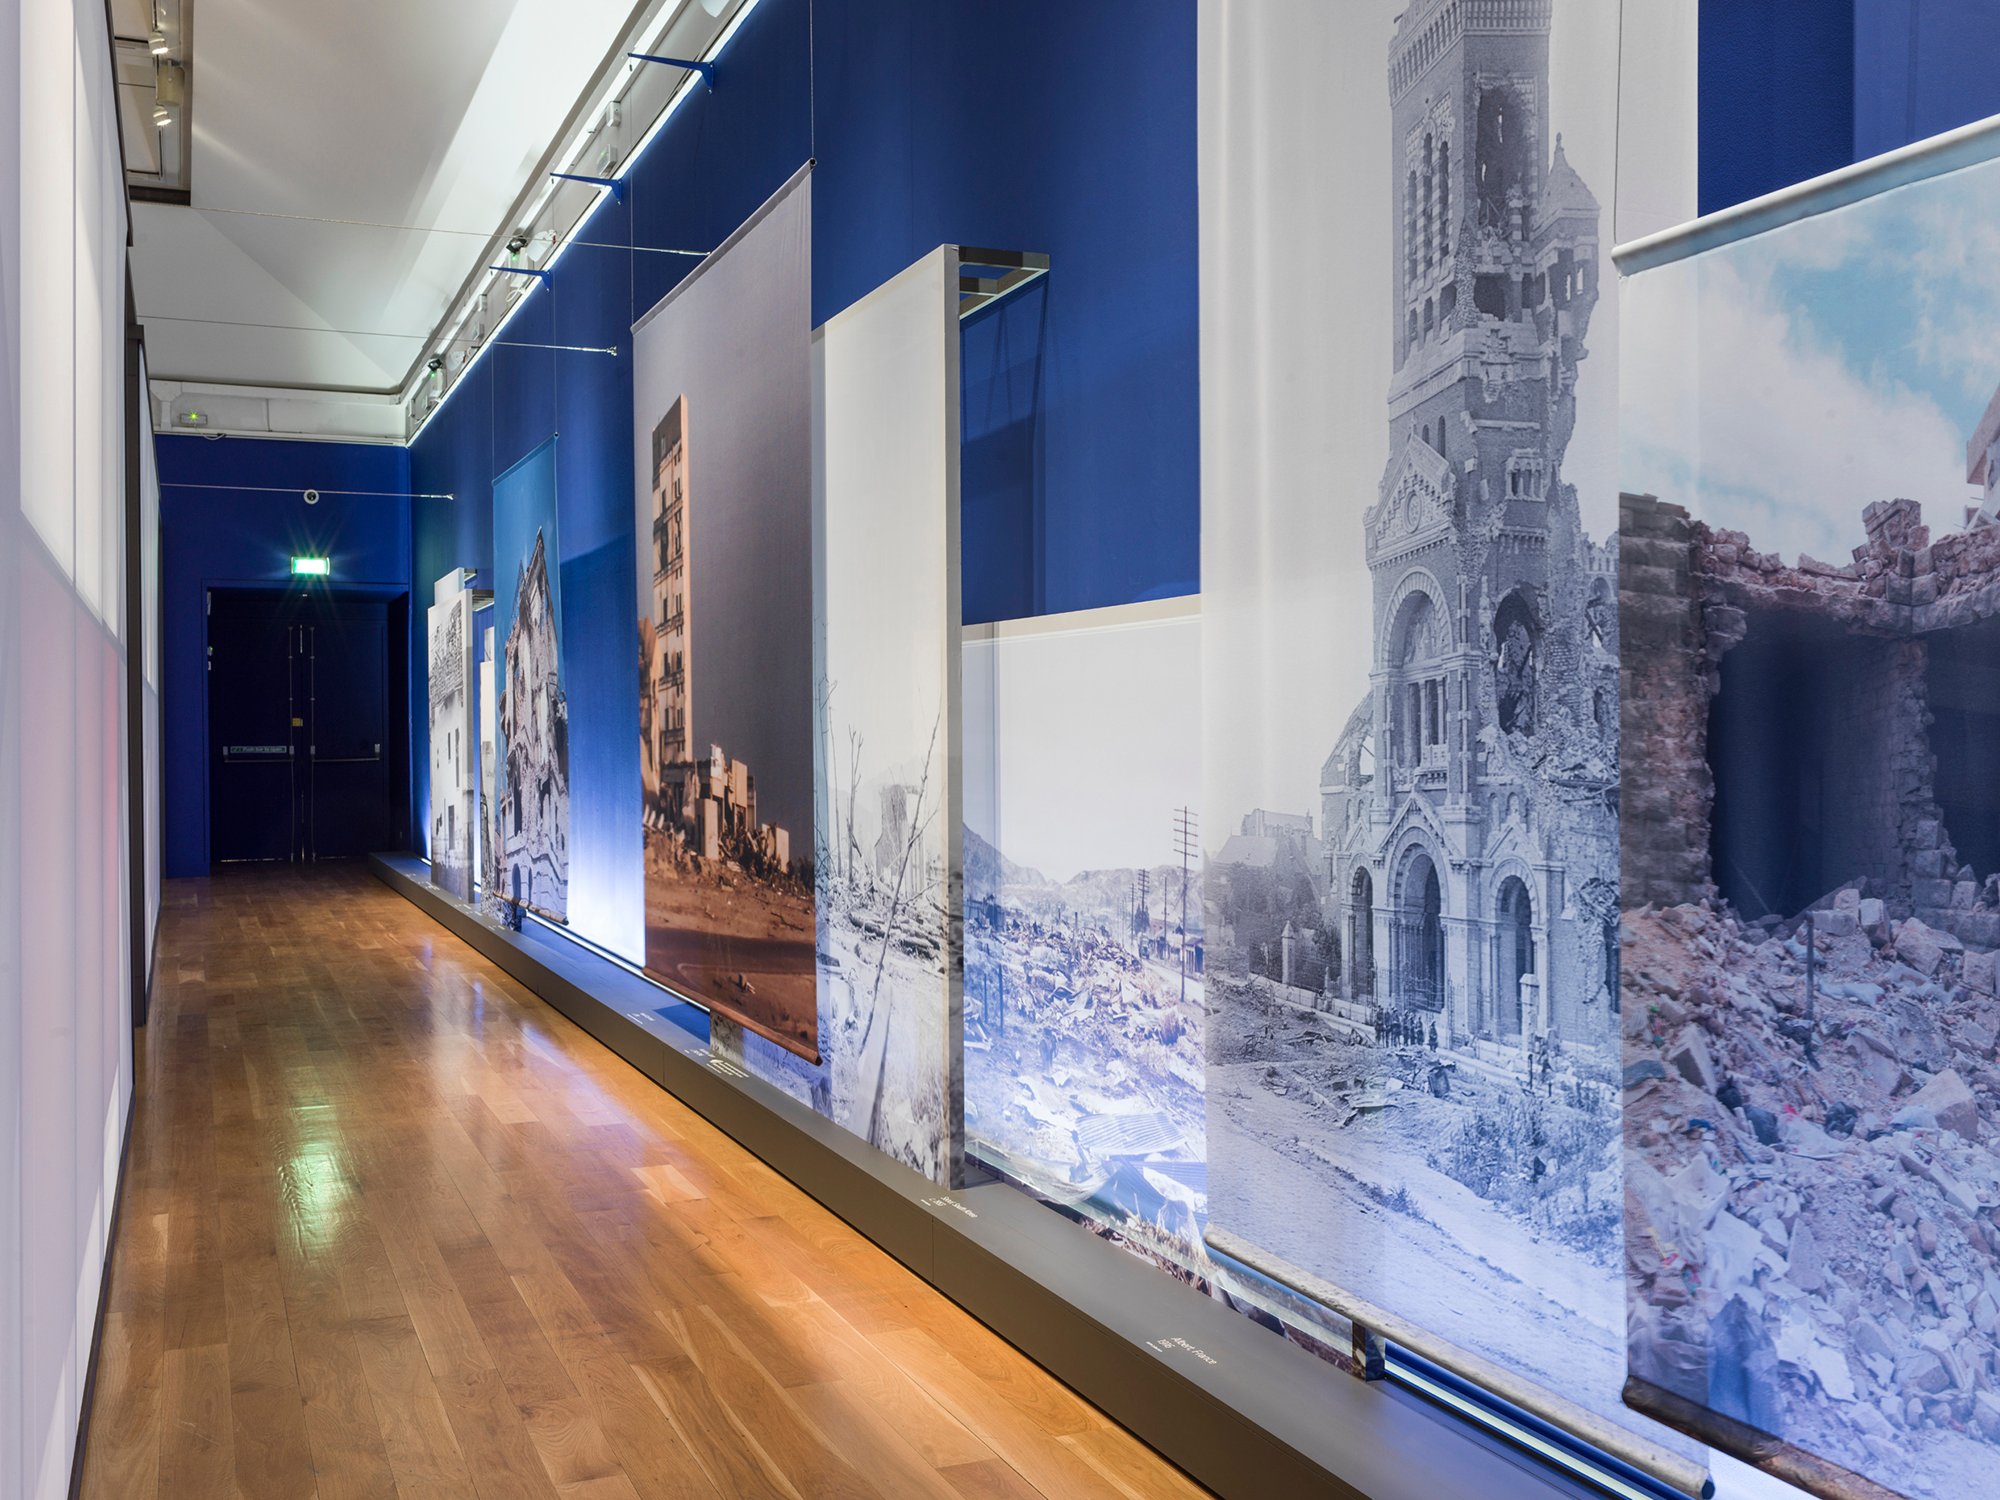 Large prints of bomb damaged buildings hang along the wall of a corridor at Historic England's What Remains exhibition at the Imperial War Museum.